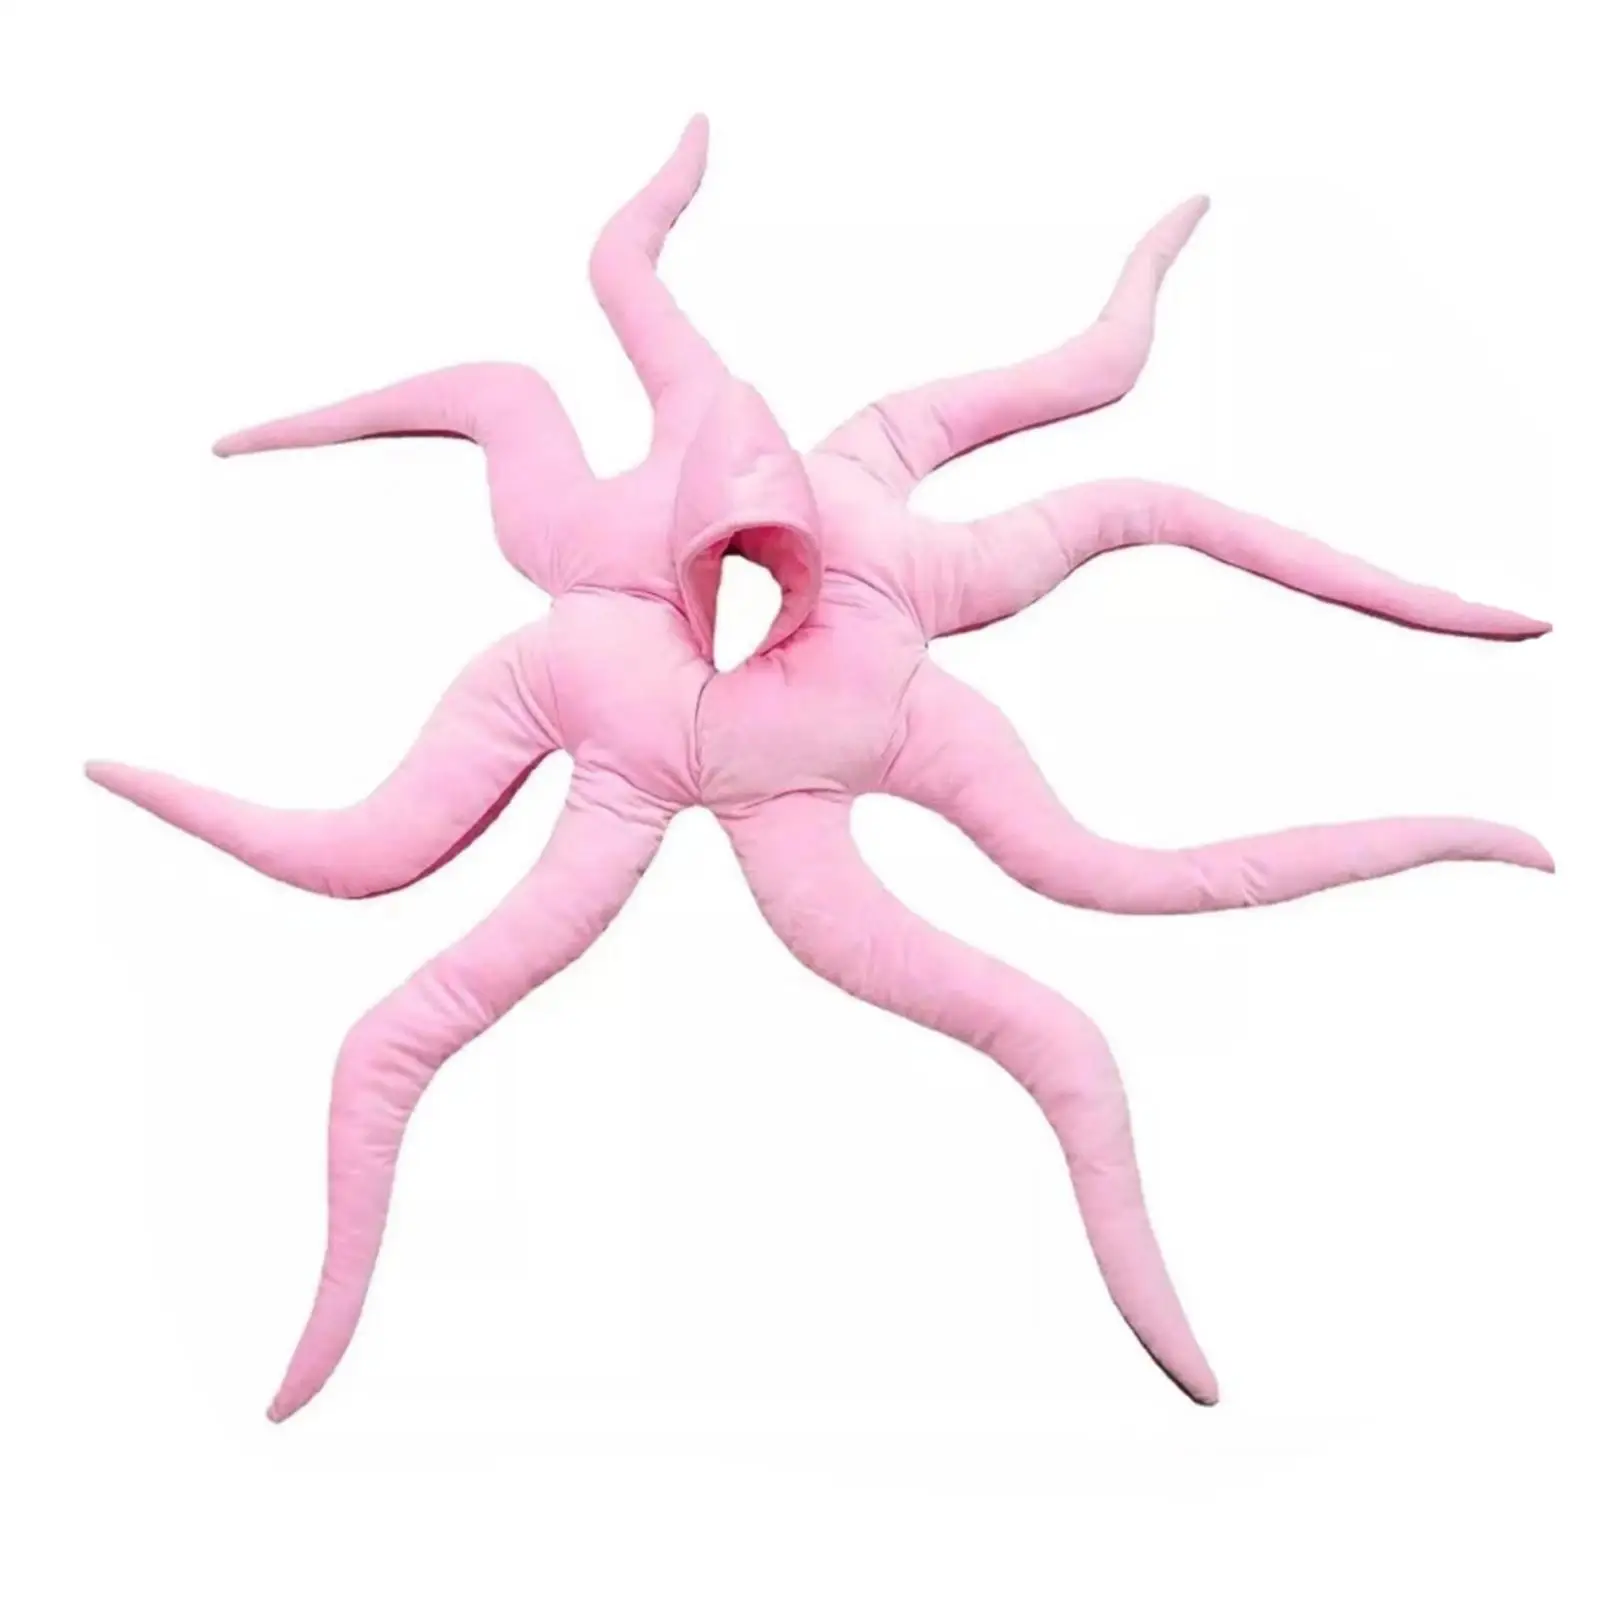 Baby Octopus Costume Wearable Fancy Dress Adorable Plush Toy Hooded Large Octopus for Adults Infants Halloween Family Newborn